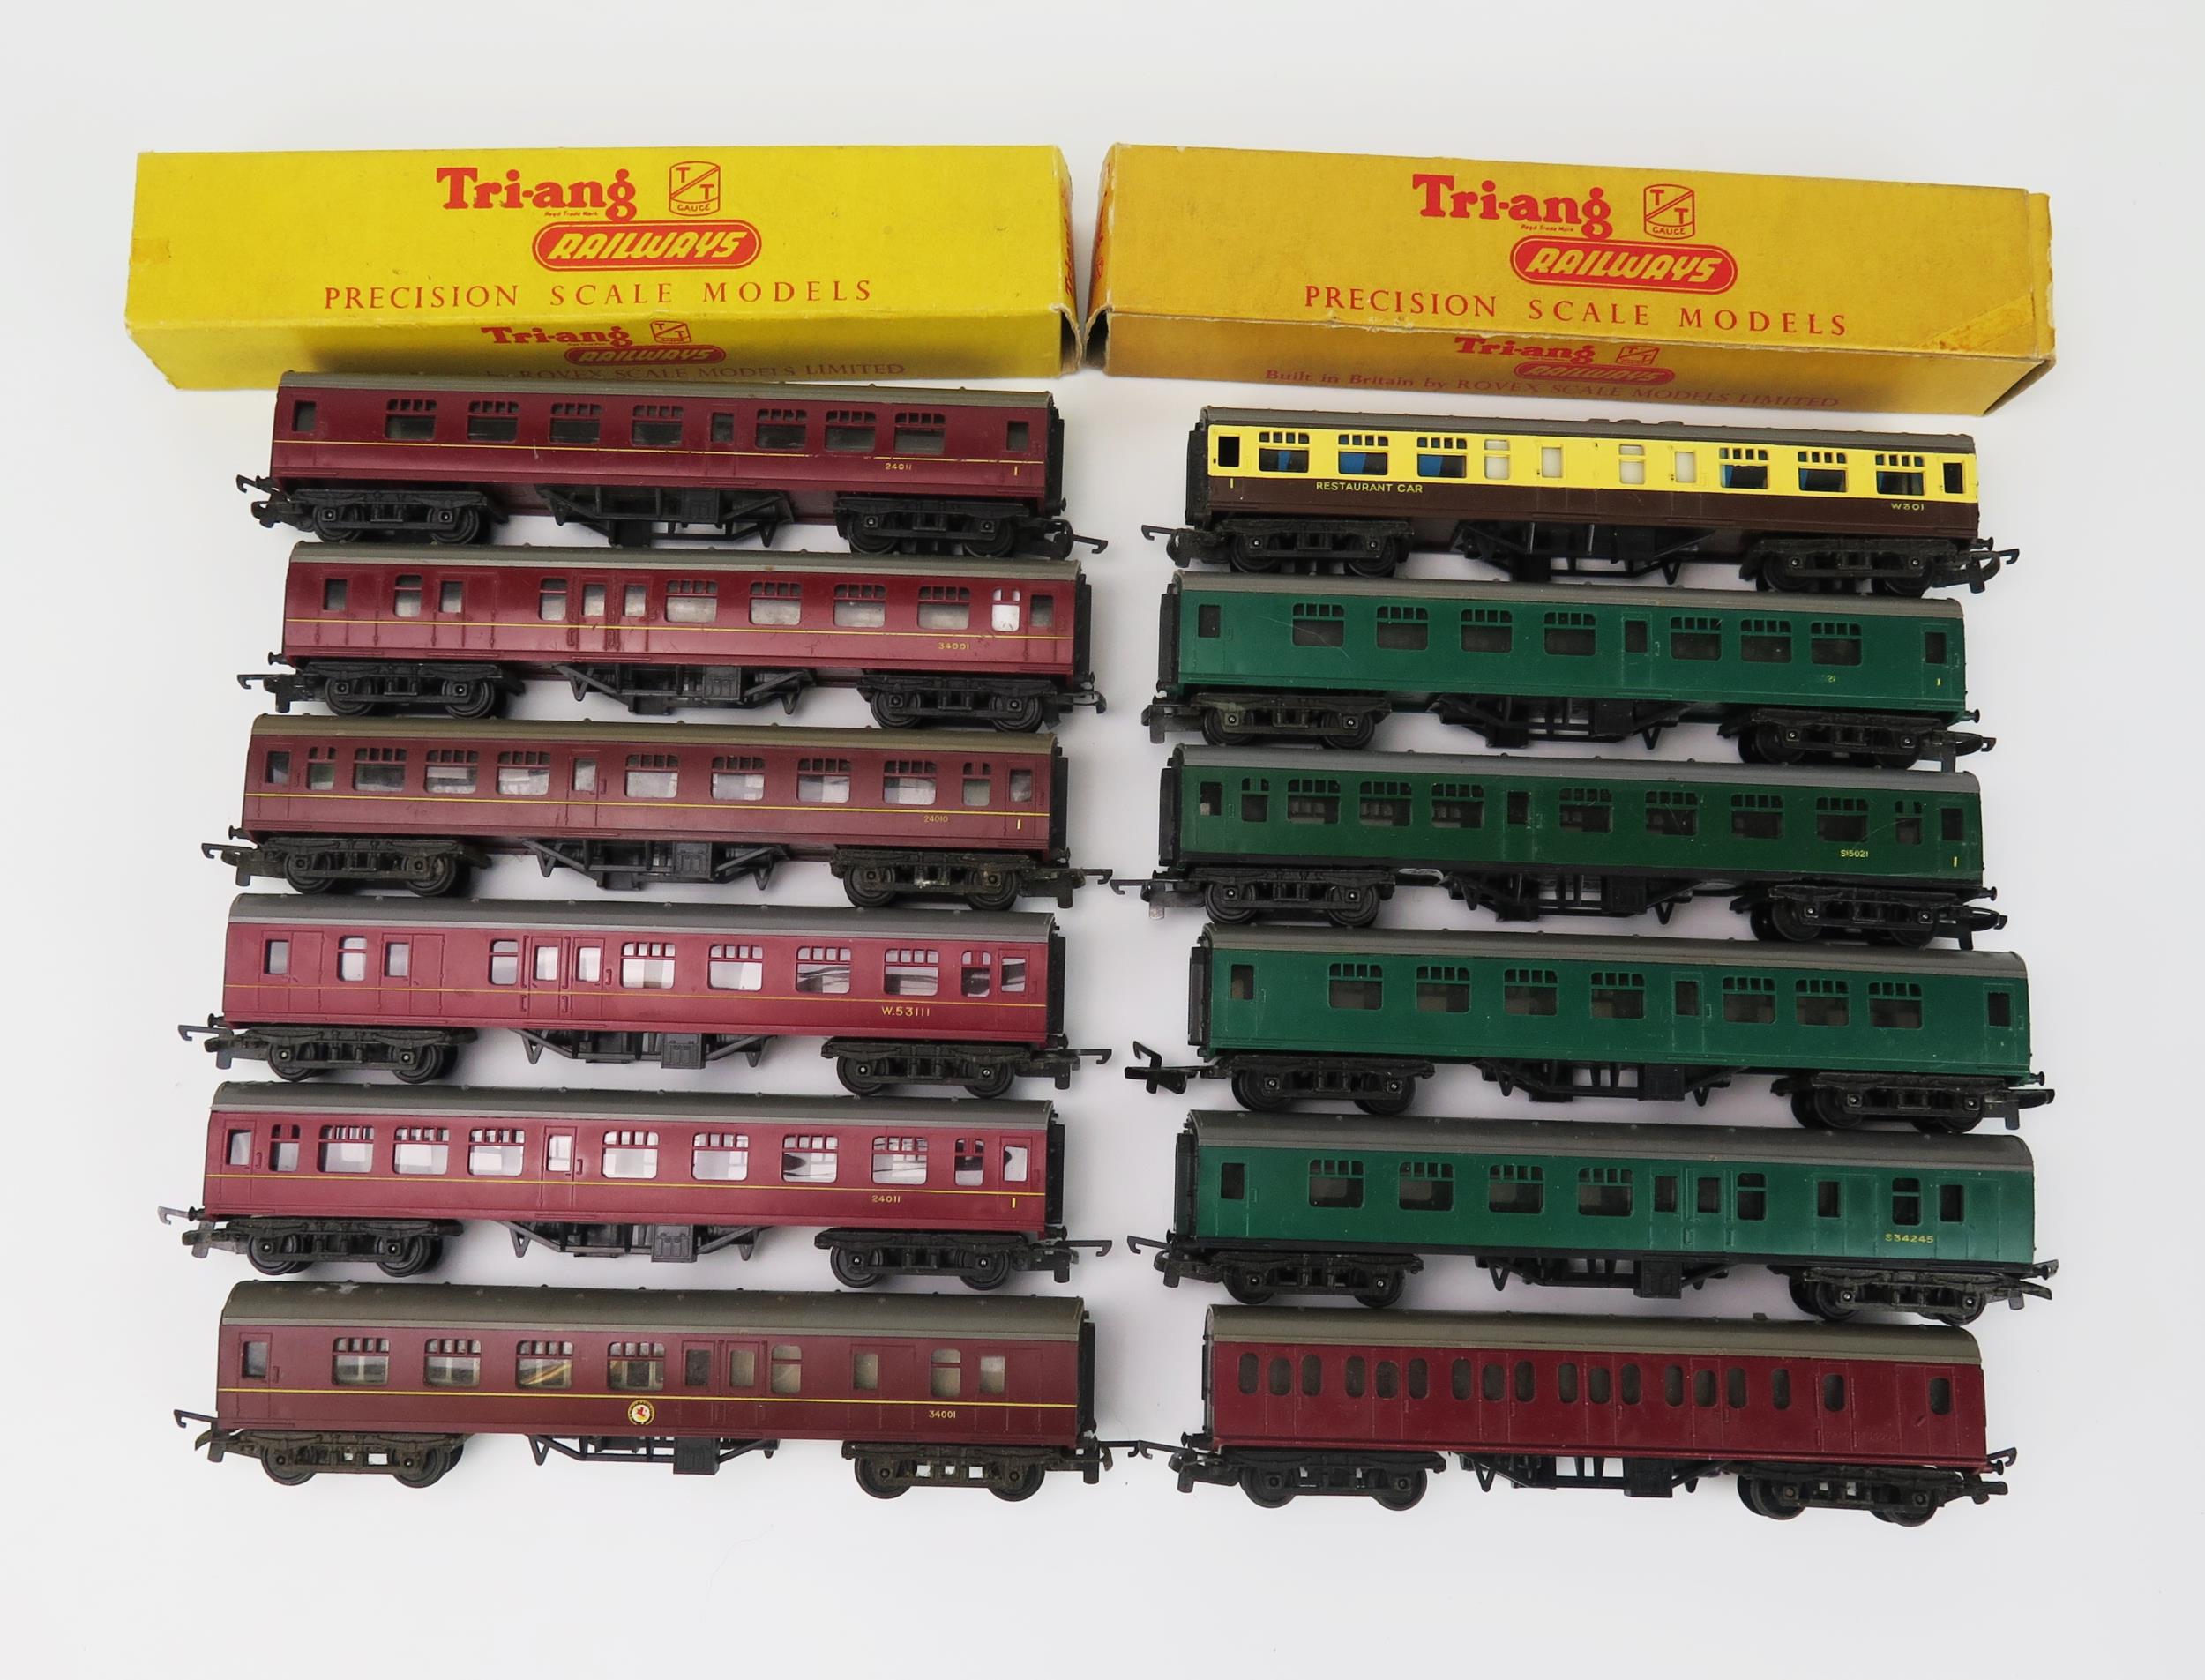 Triang Railways TT Gauge Passenger Coaches, two in incomplete boxes